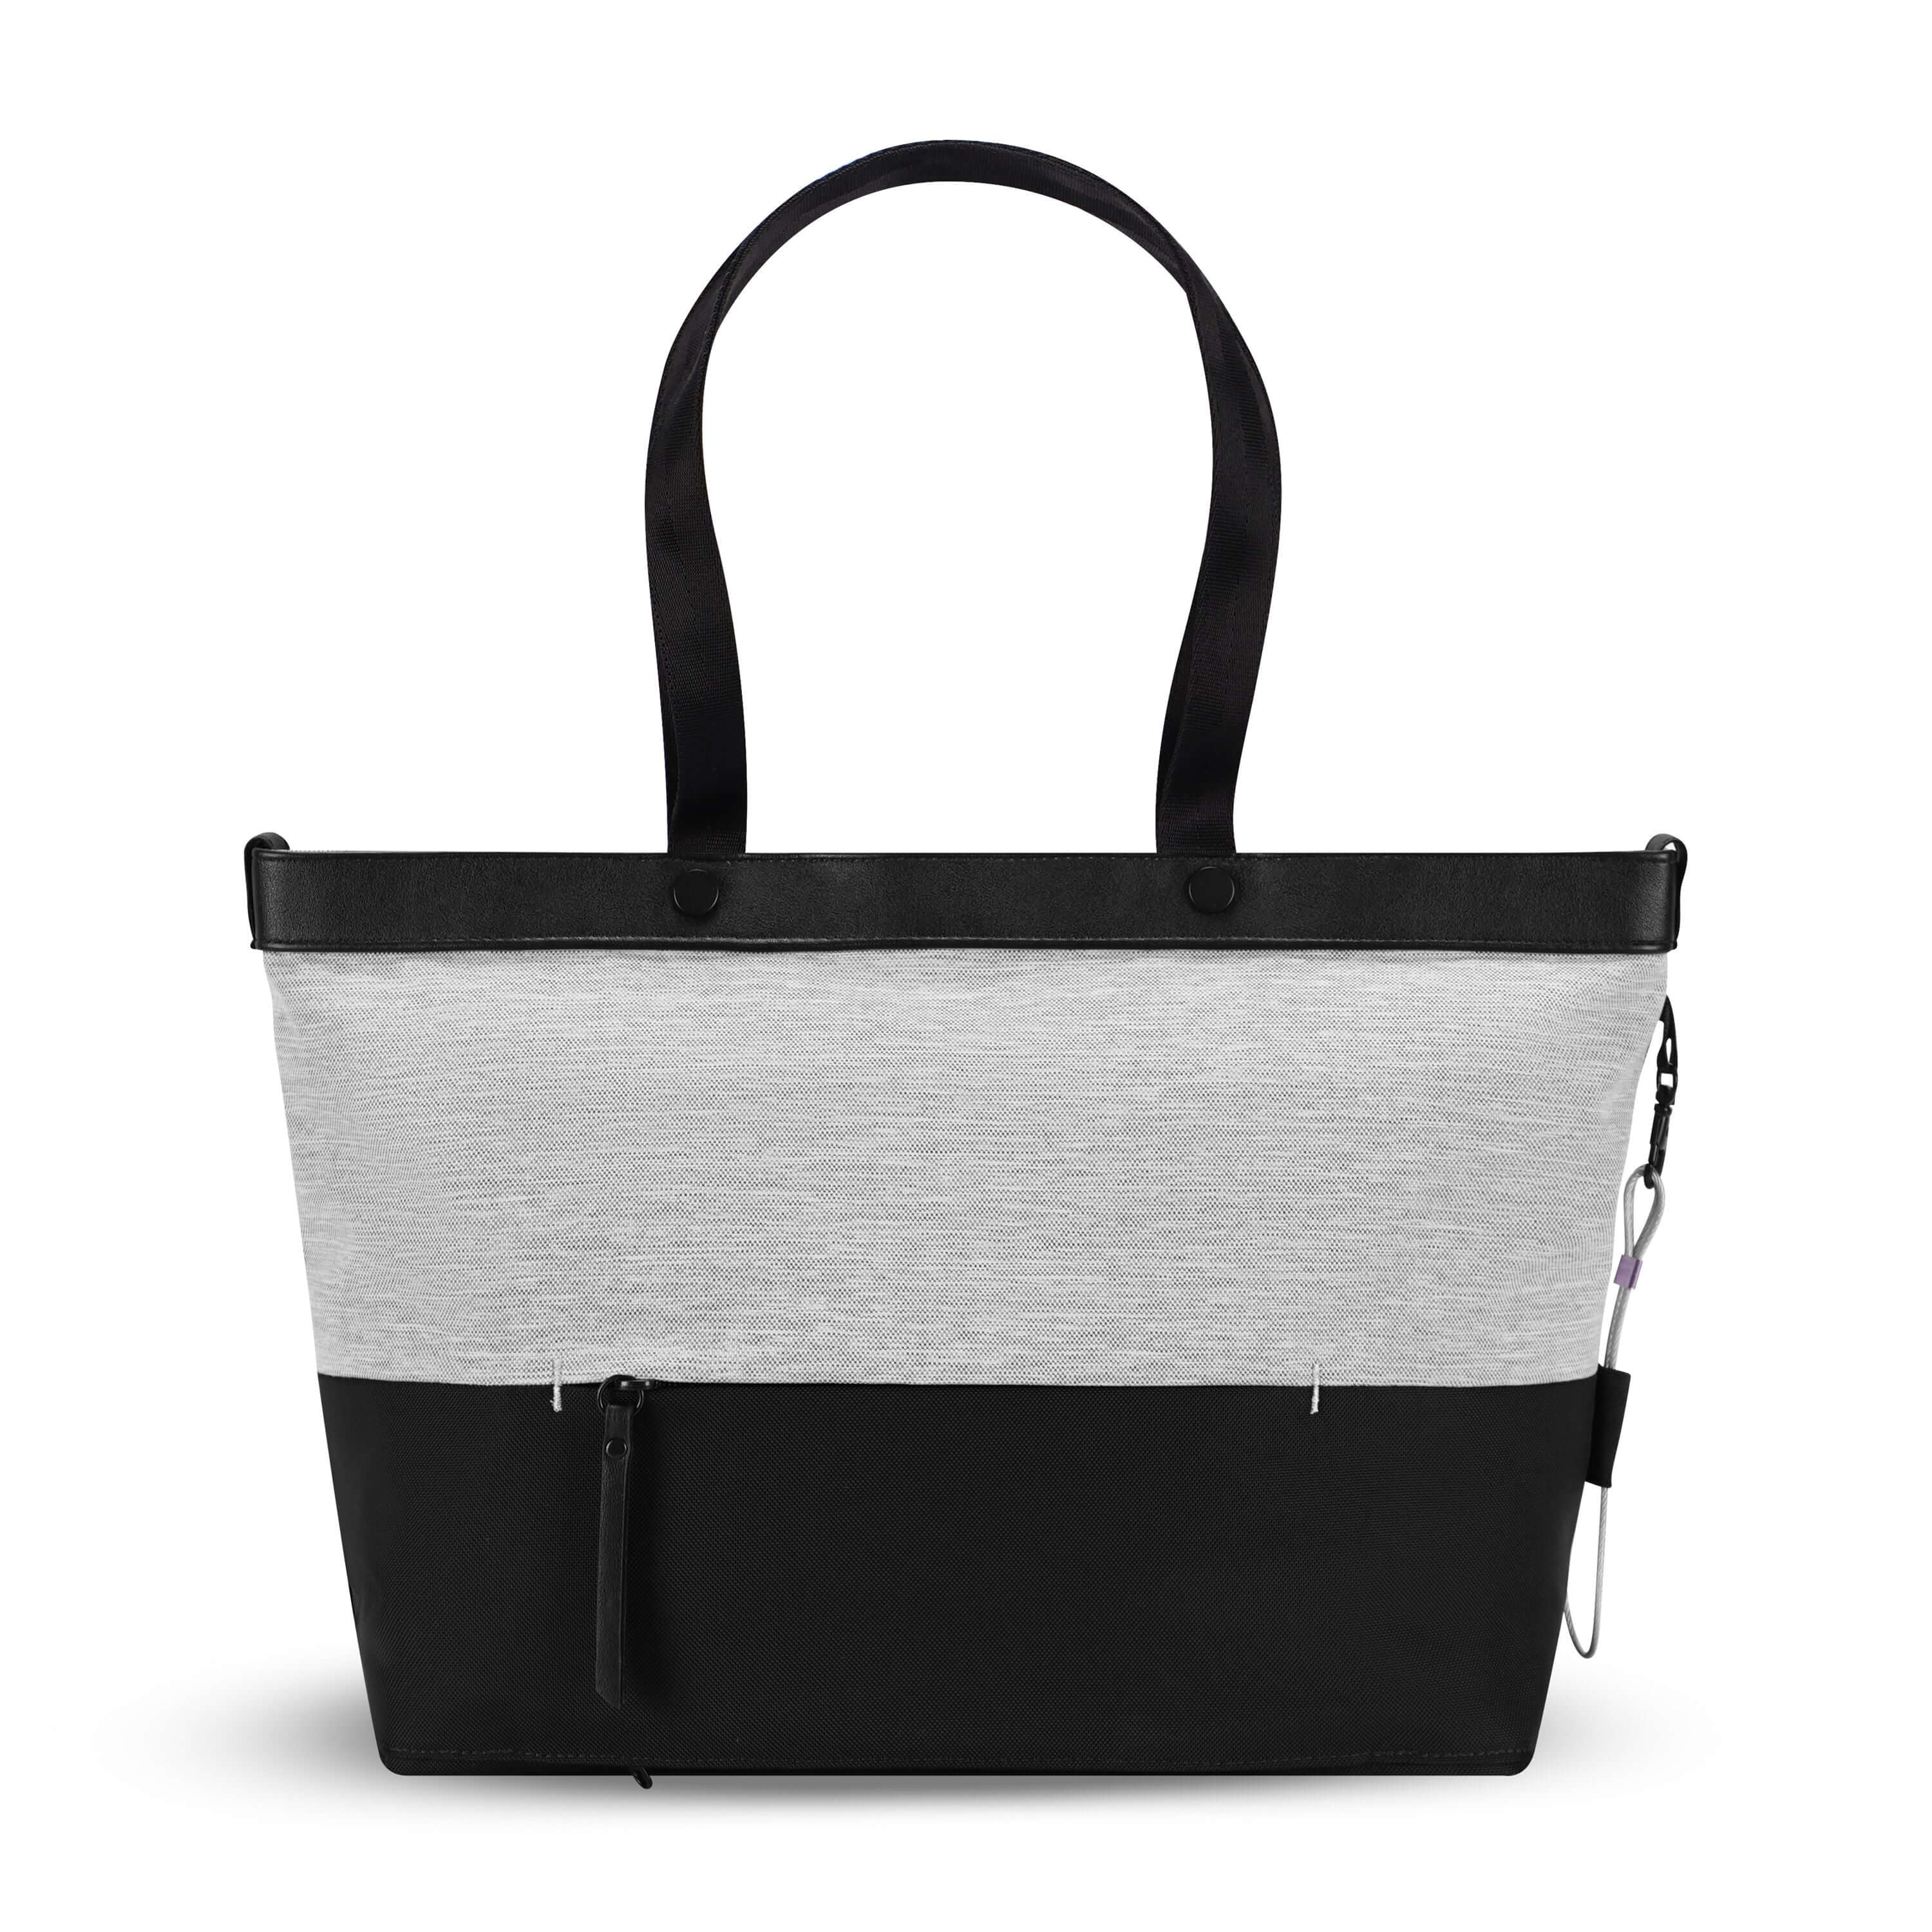 Back view of Sherpani's Anti-Theft tote, the Cali AT in Sterling, with vegan leather accents in black. There is a zipper compartment that acts as a luggage pass-through or trolley sleve, and a chair loop lock on one side that is secured by an elastic tab. 